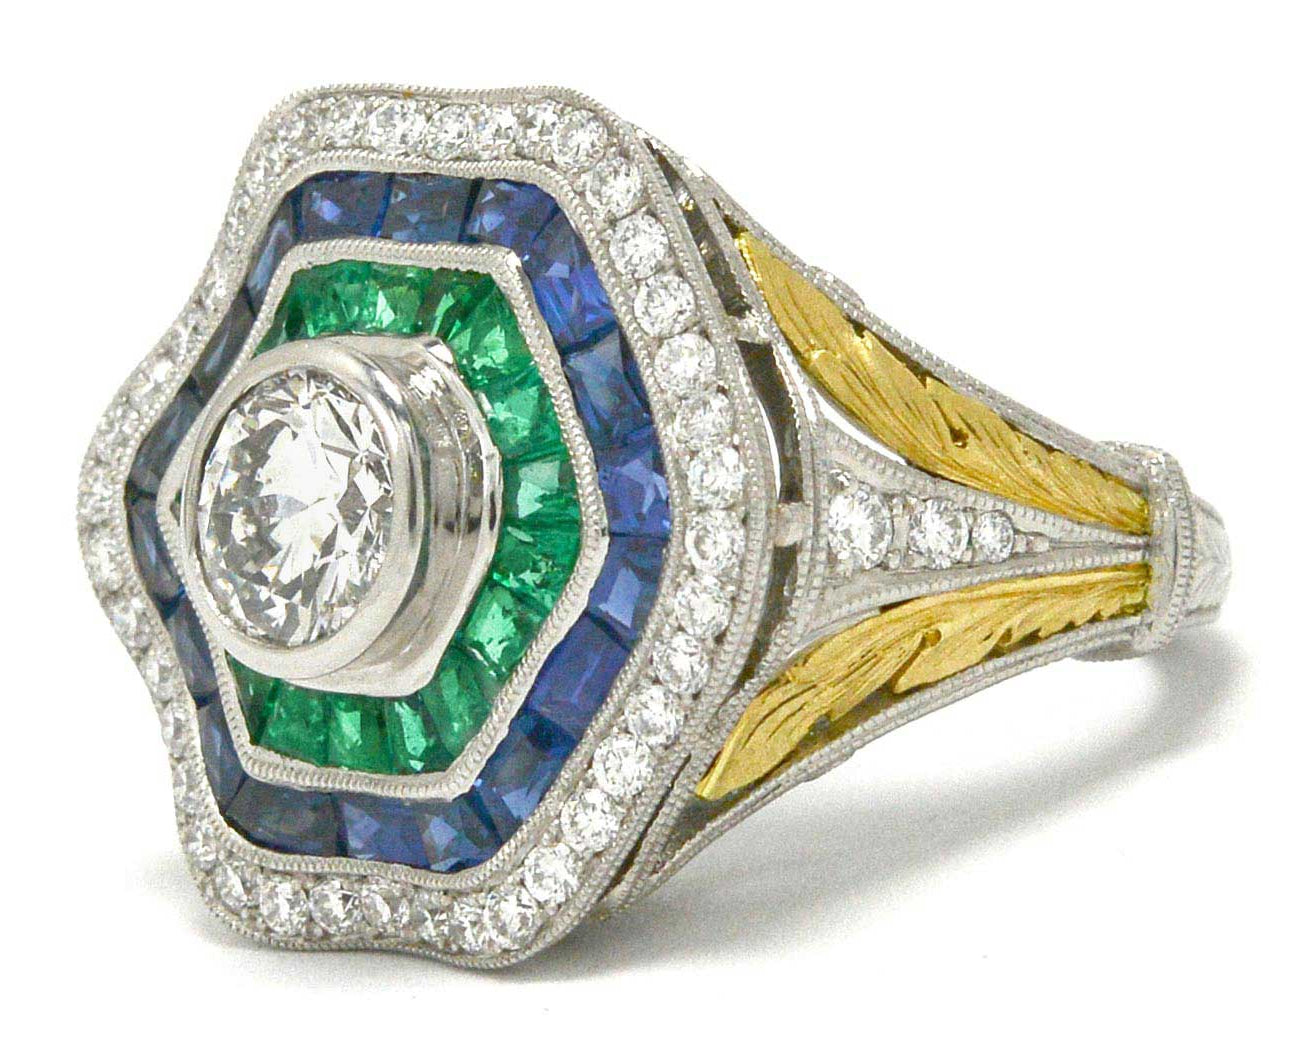 A 1 carat round brilliant diamond hexagon ballerina ring with emeralds and sapphires.